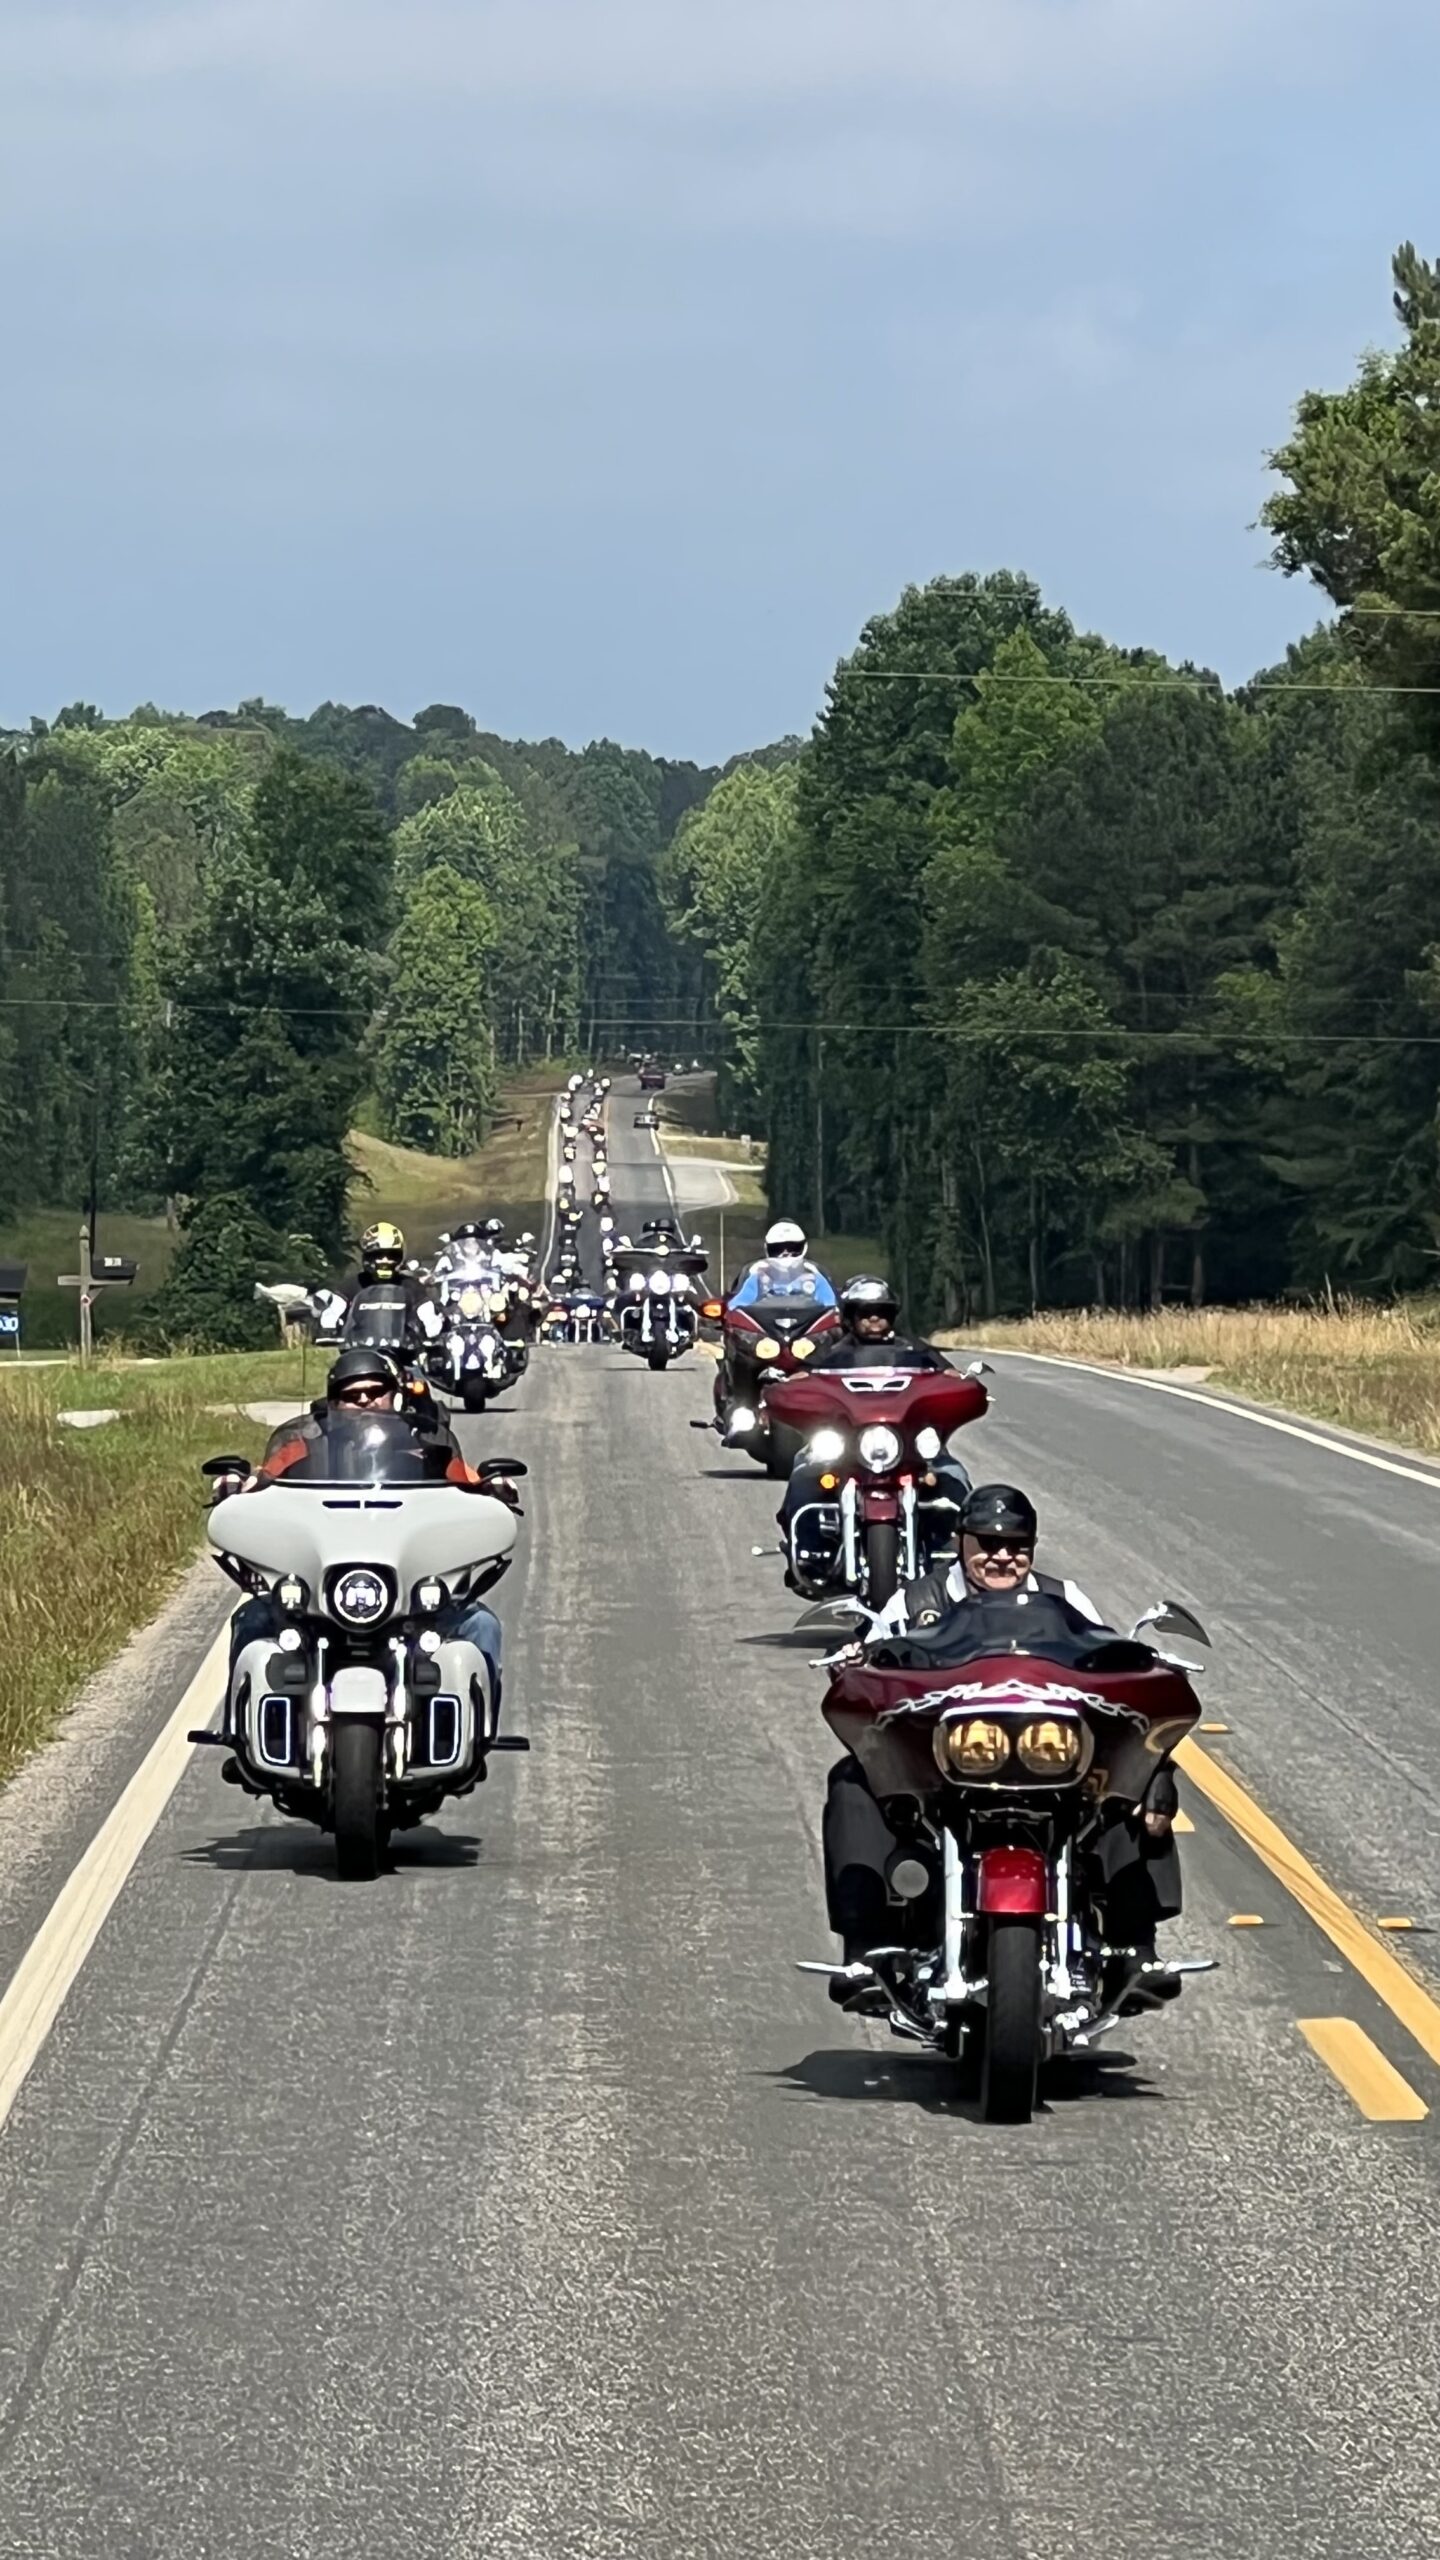 We, the American Legion Riders of Post 233, thank you. We are already